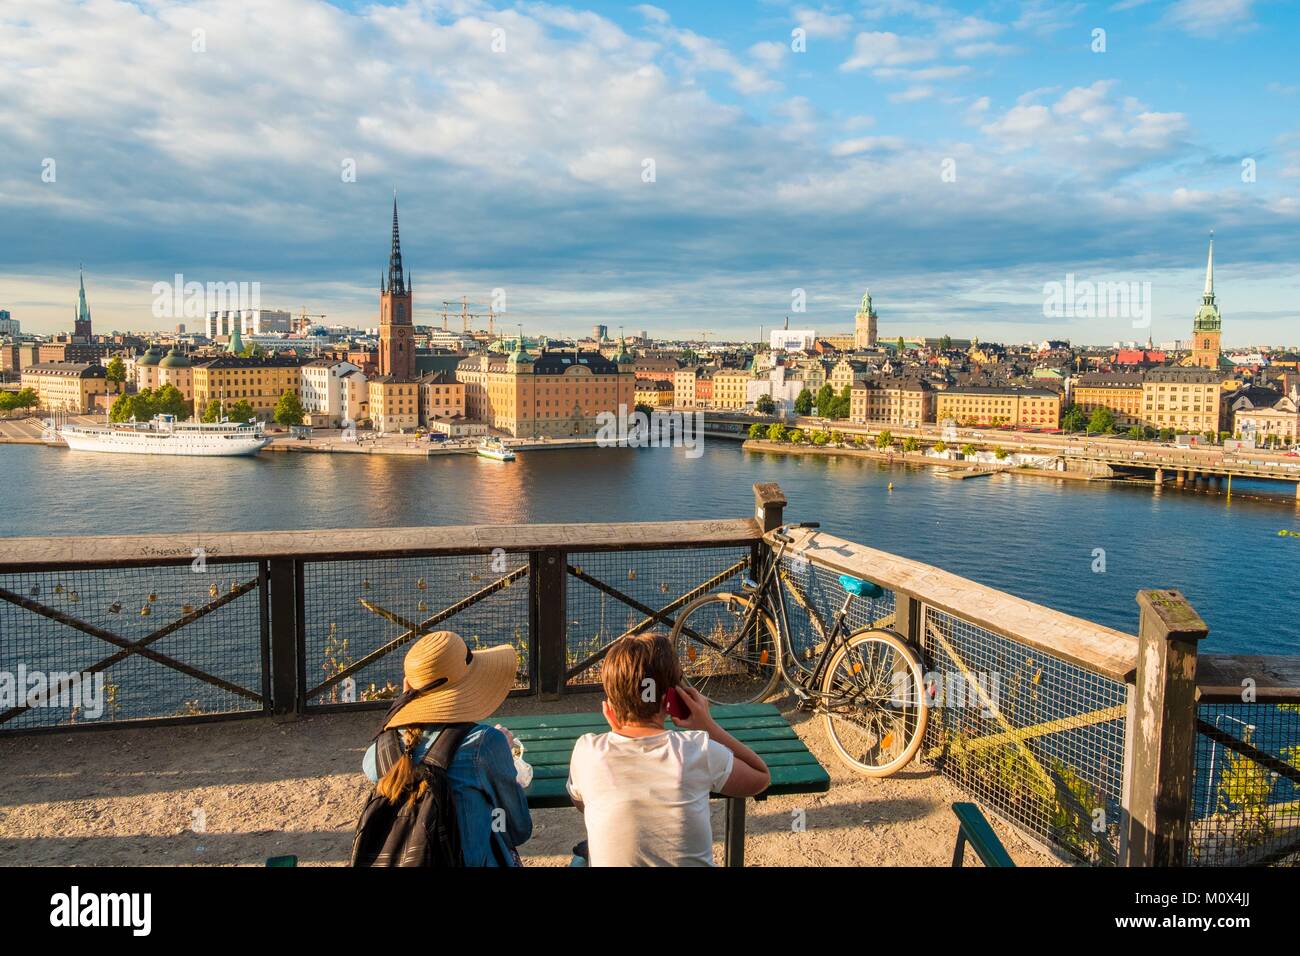 Sweden,Stockholm,Sodermalm district,lookout with view of Gamla Stan (old town) Stock Photo